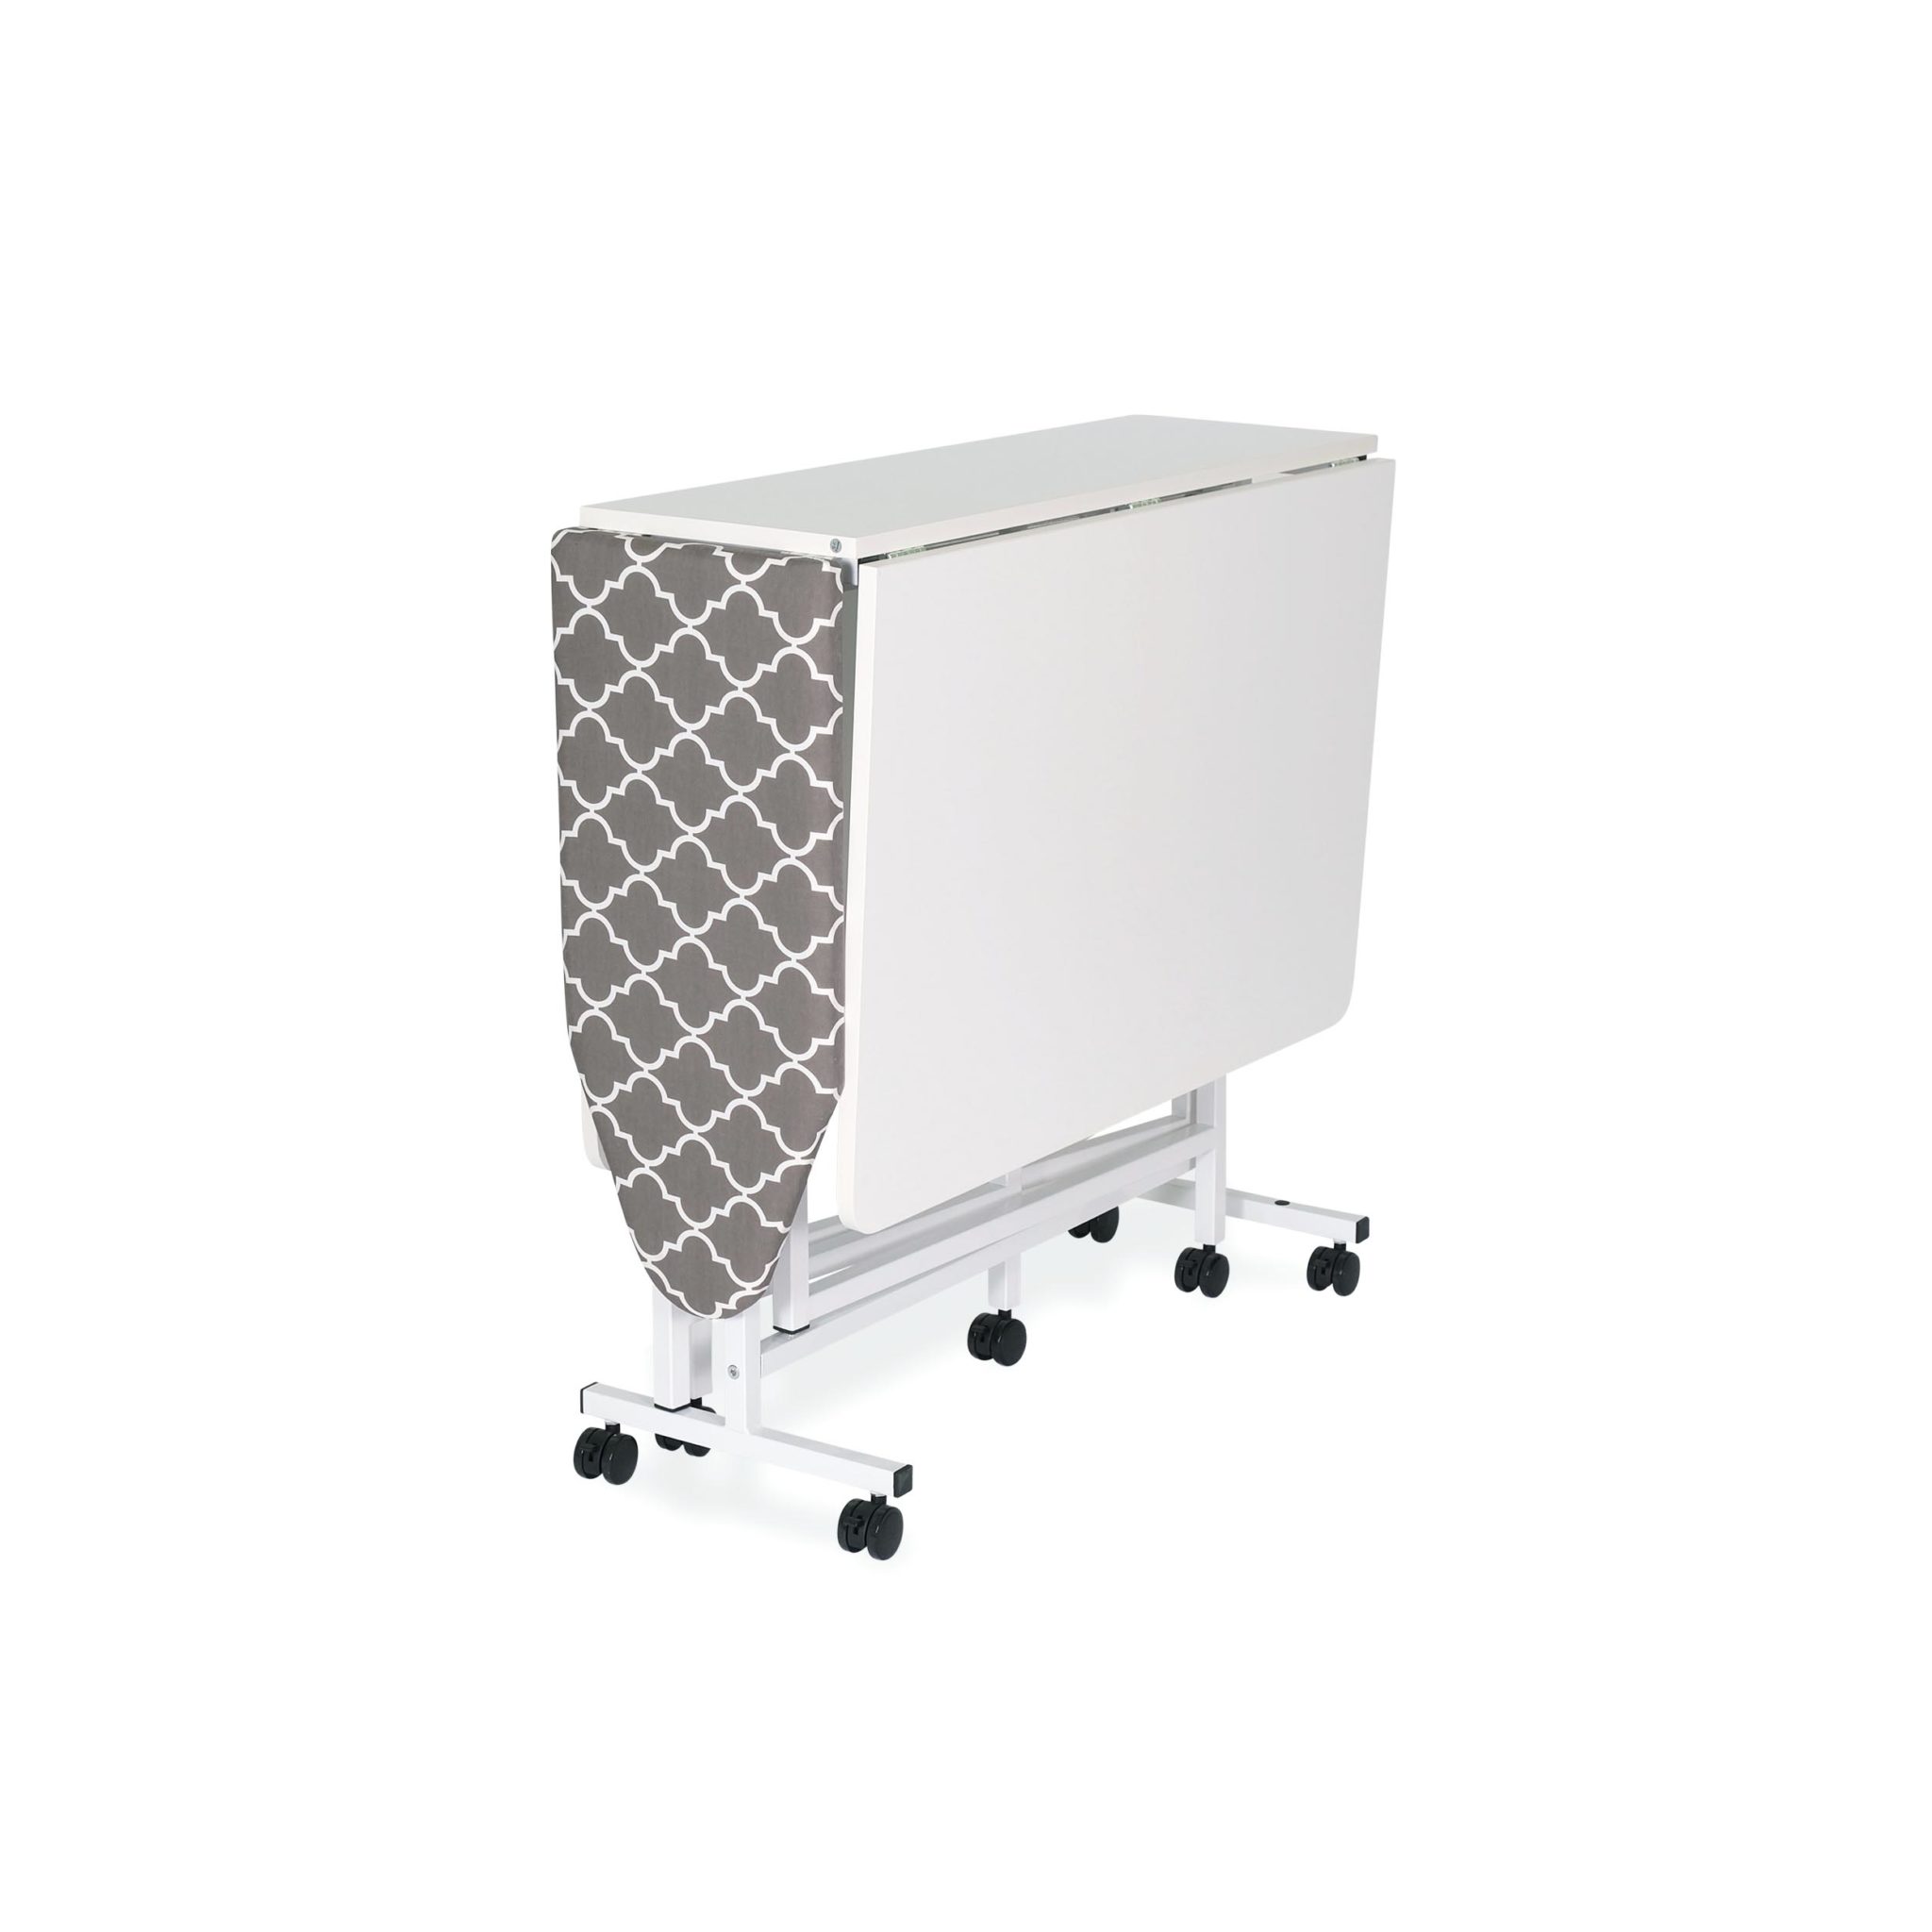 Millie Cutting & Ironing Table features an expansive 59-1/8” x 35-7/8” cutting area, a built-in folding ironing station. When not in use, Millie folds into a compact, home-friendly footprint for easy storage!